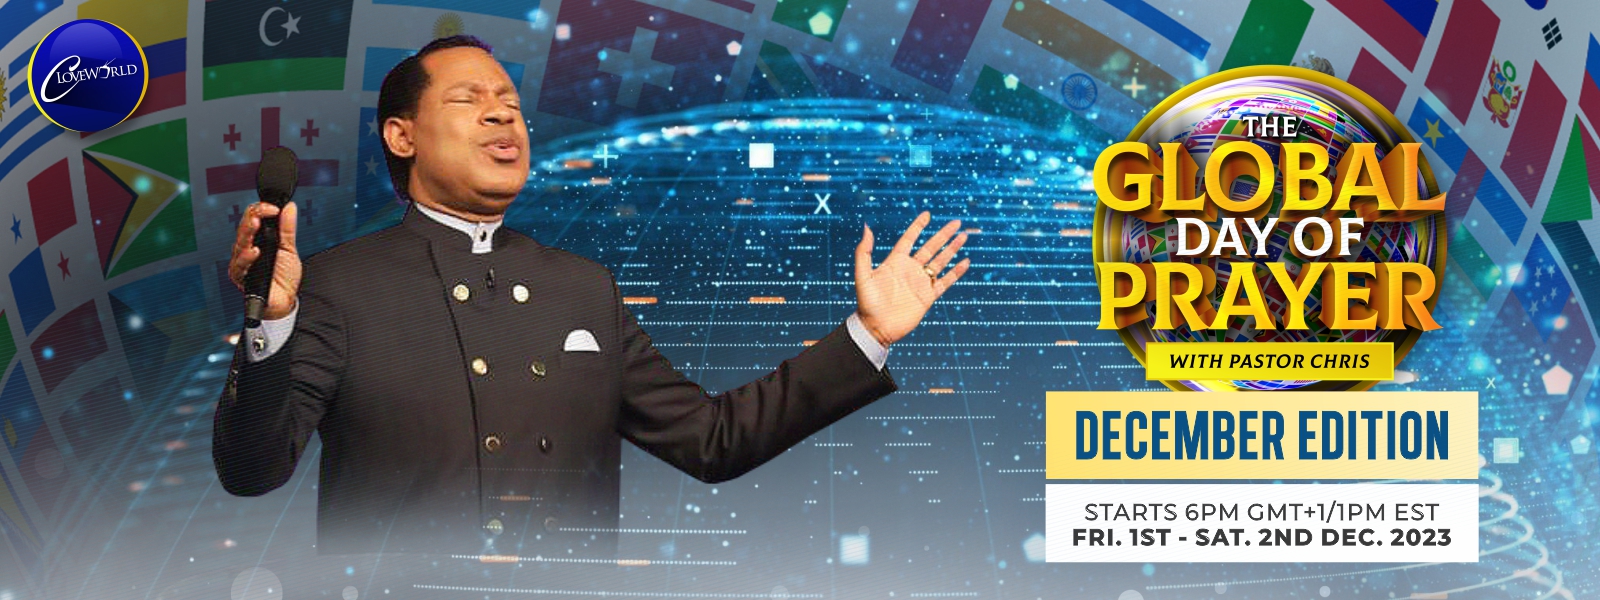 GLOBAL DAY OF PRAYER WITH PASTOR CHRIS DECEMBER EDITION